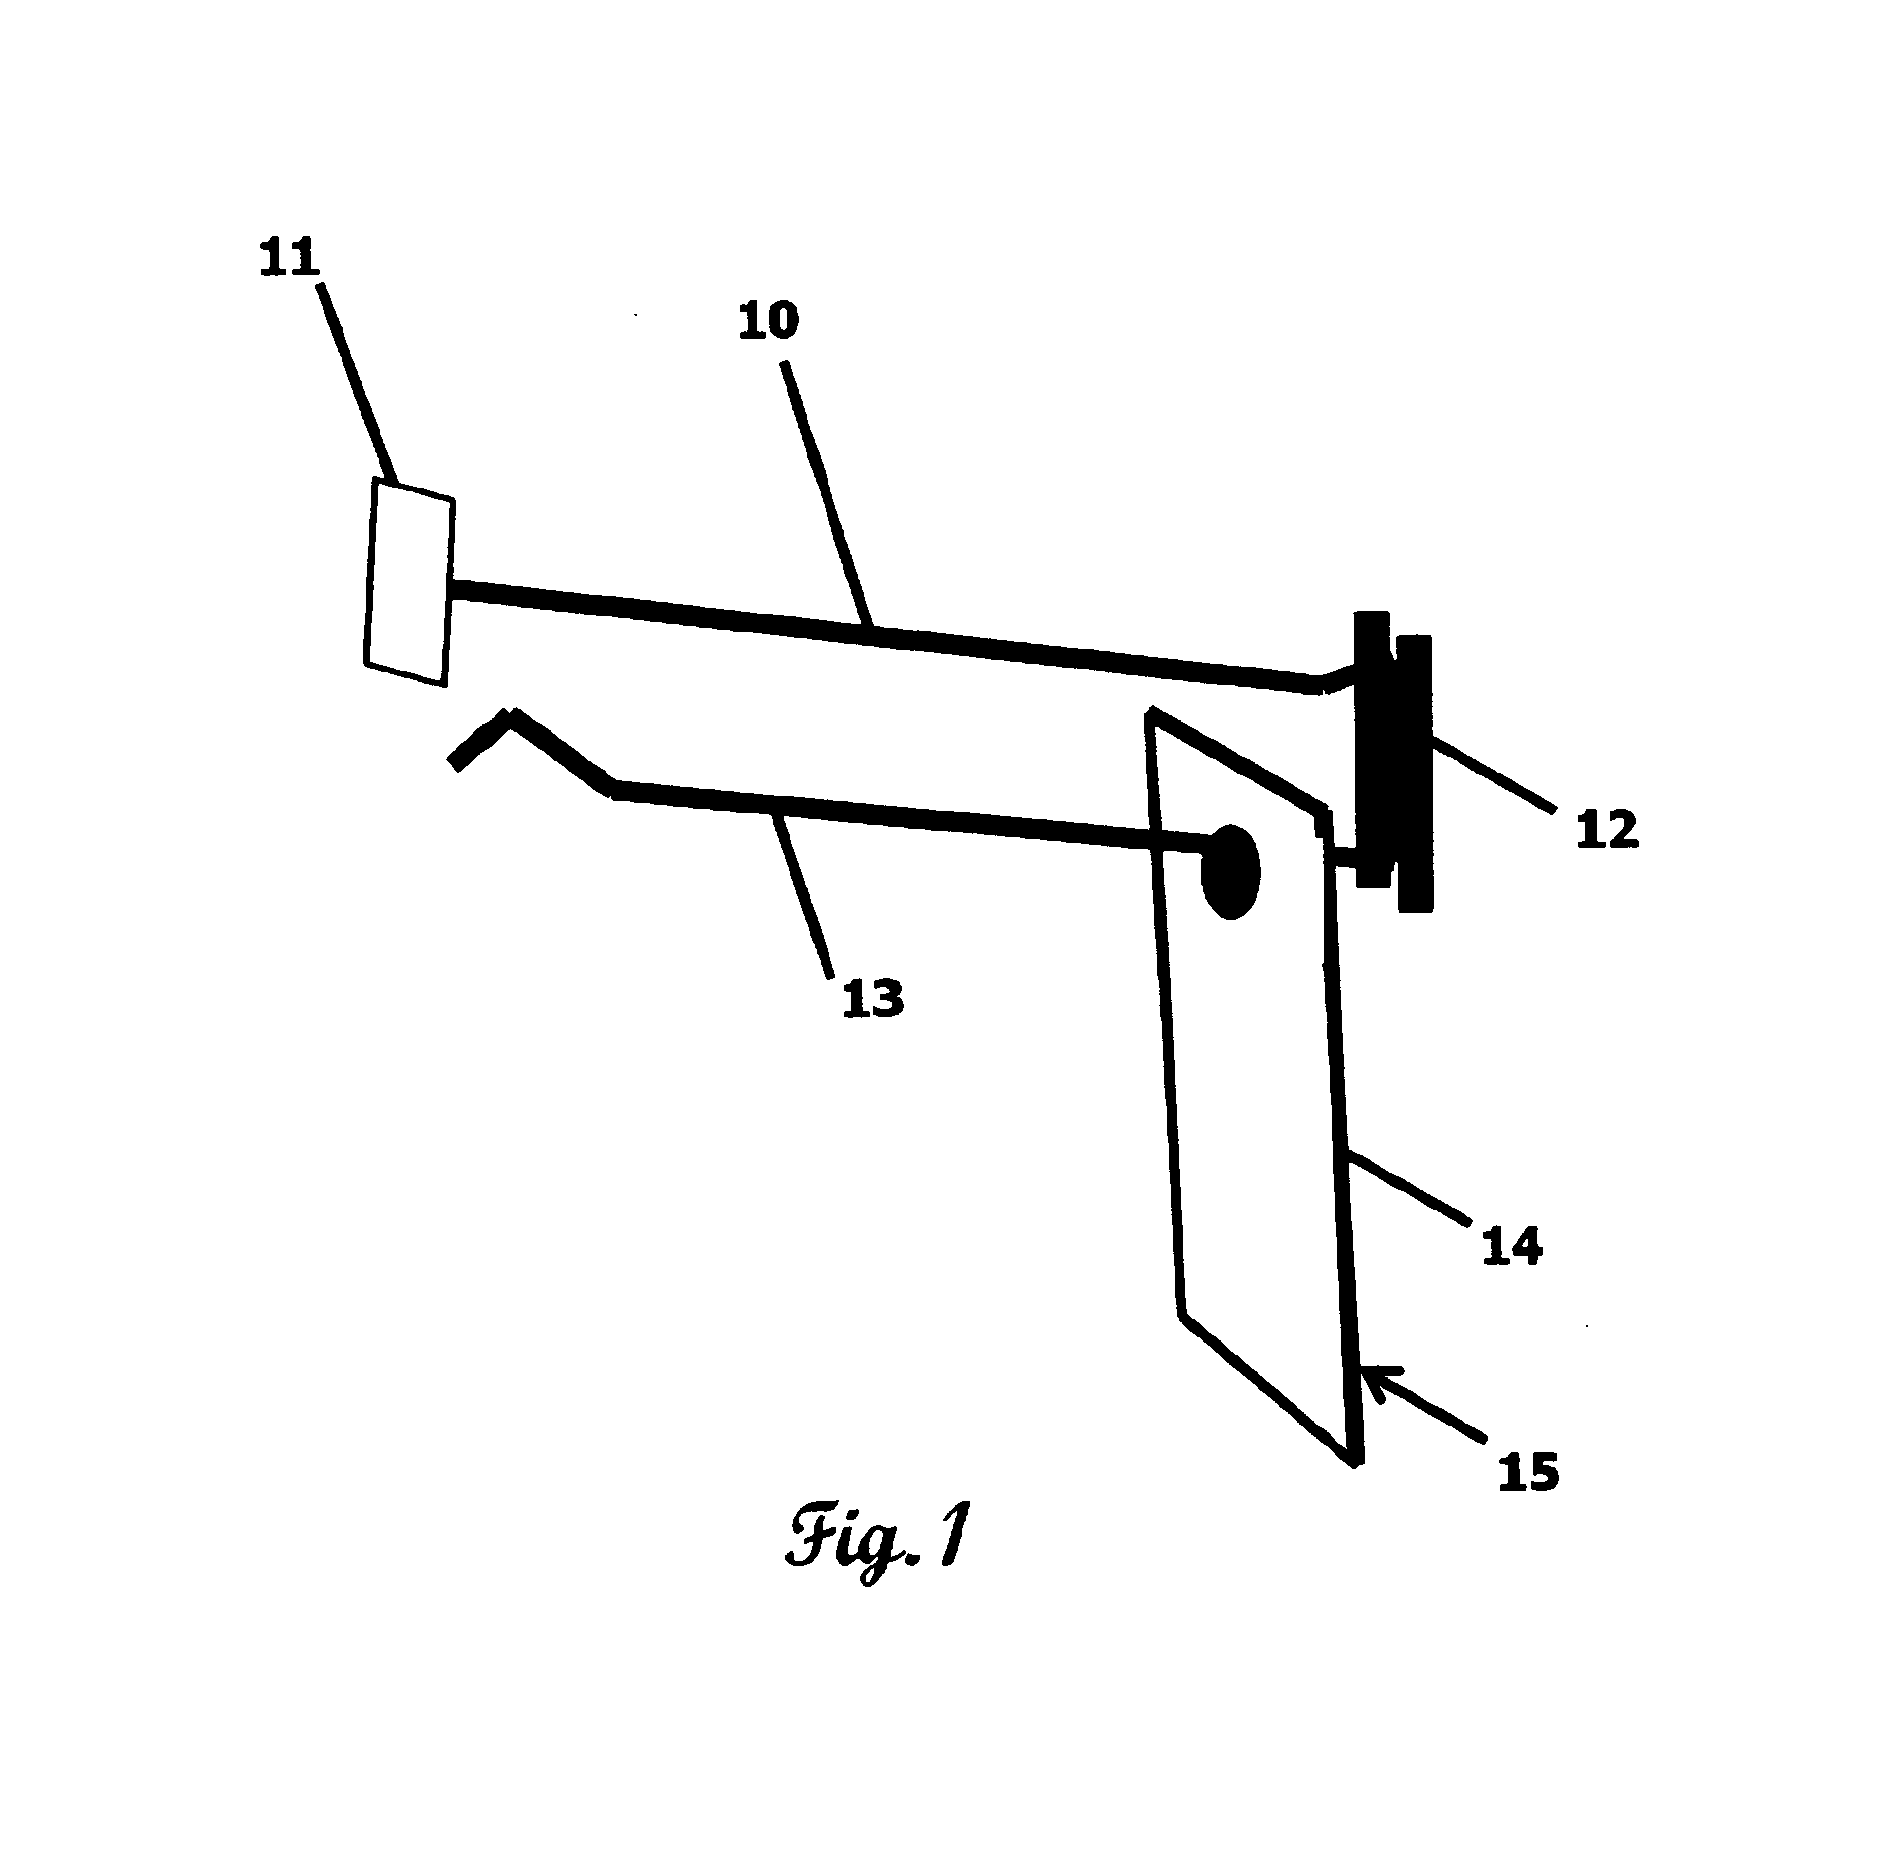 Item monitoring system and methods